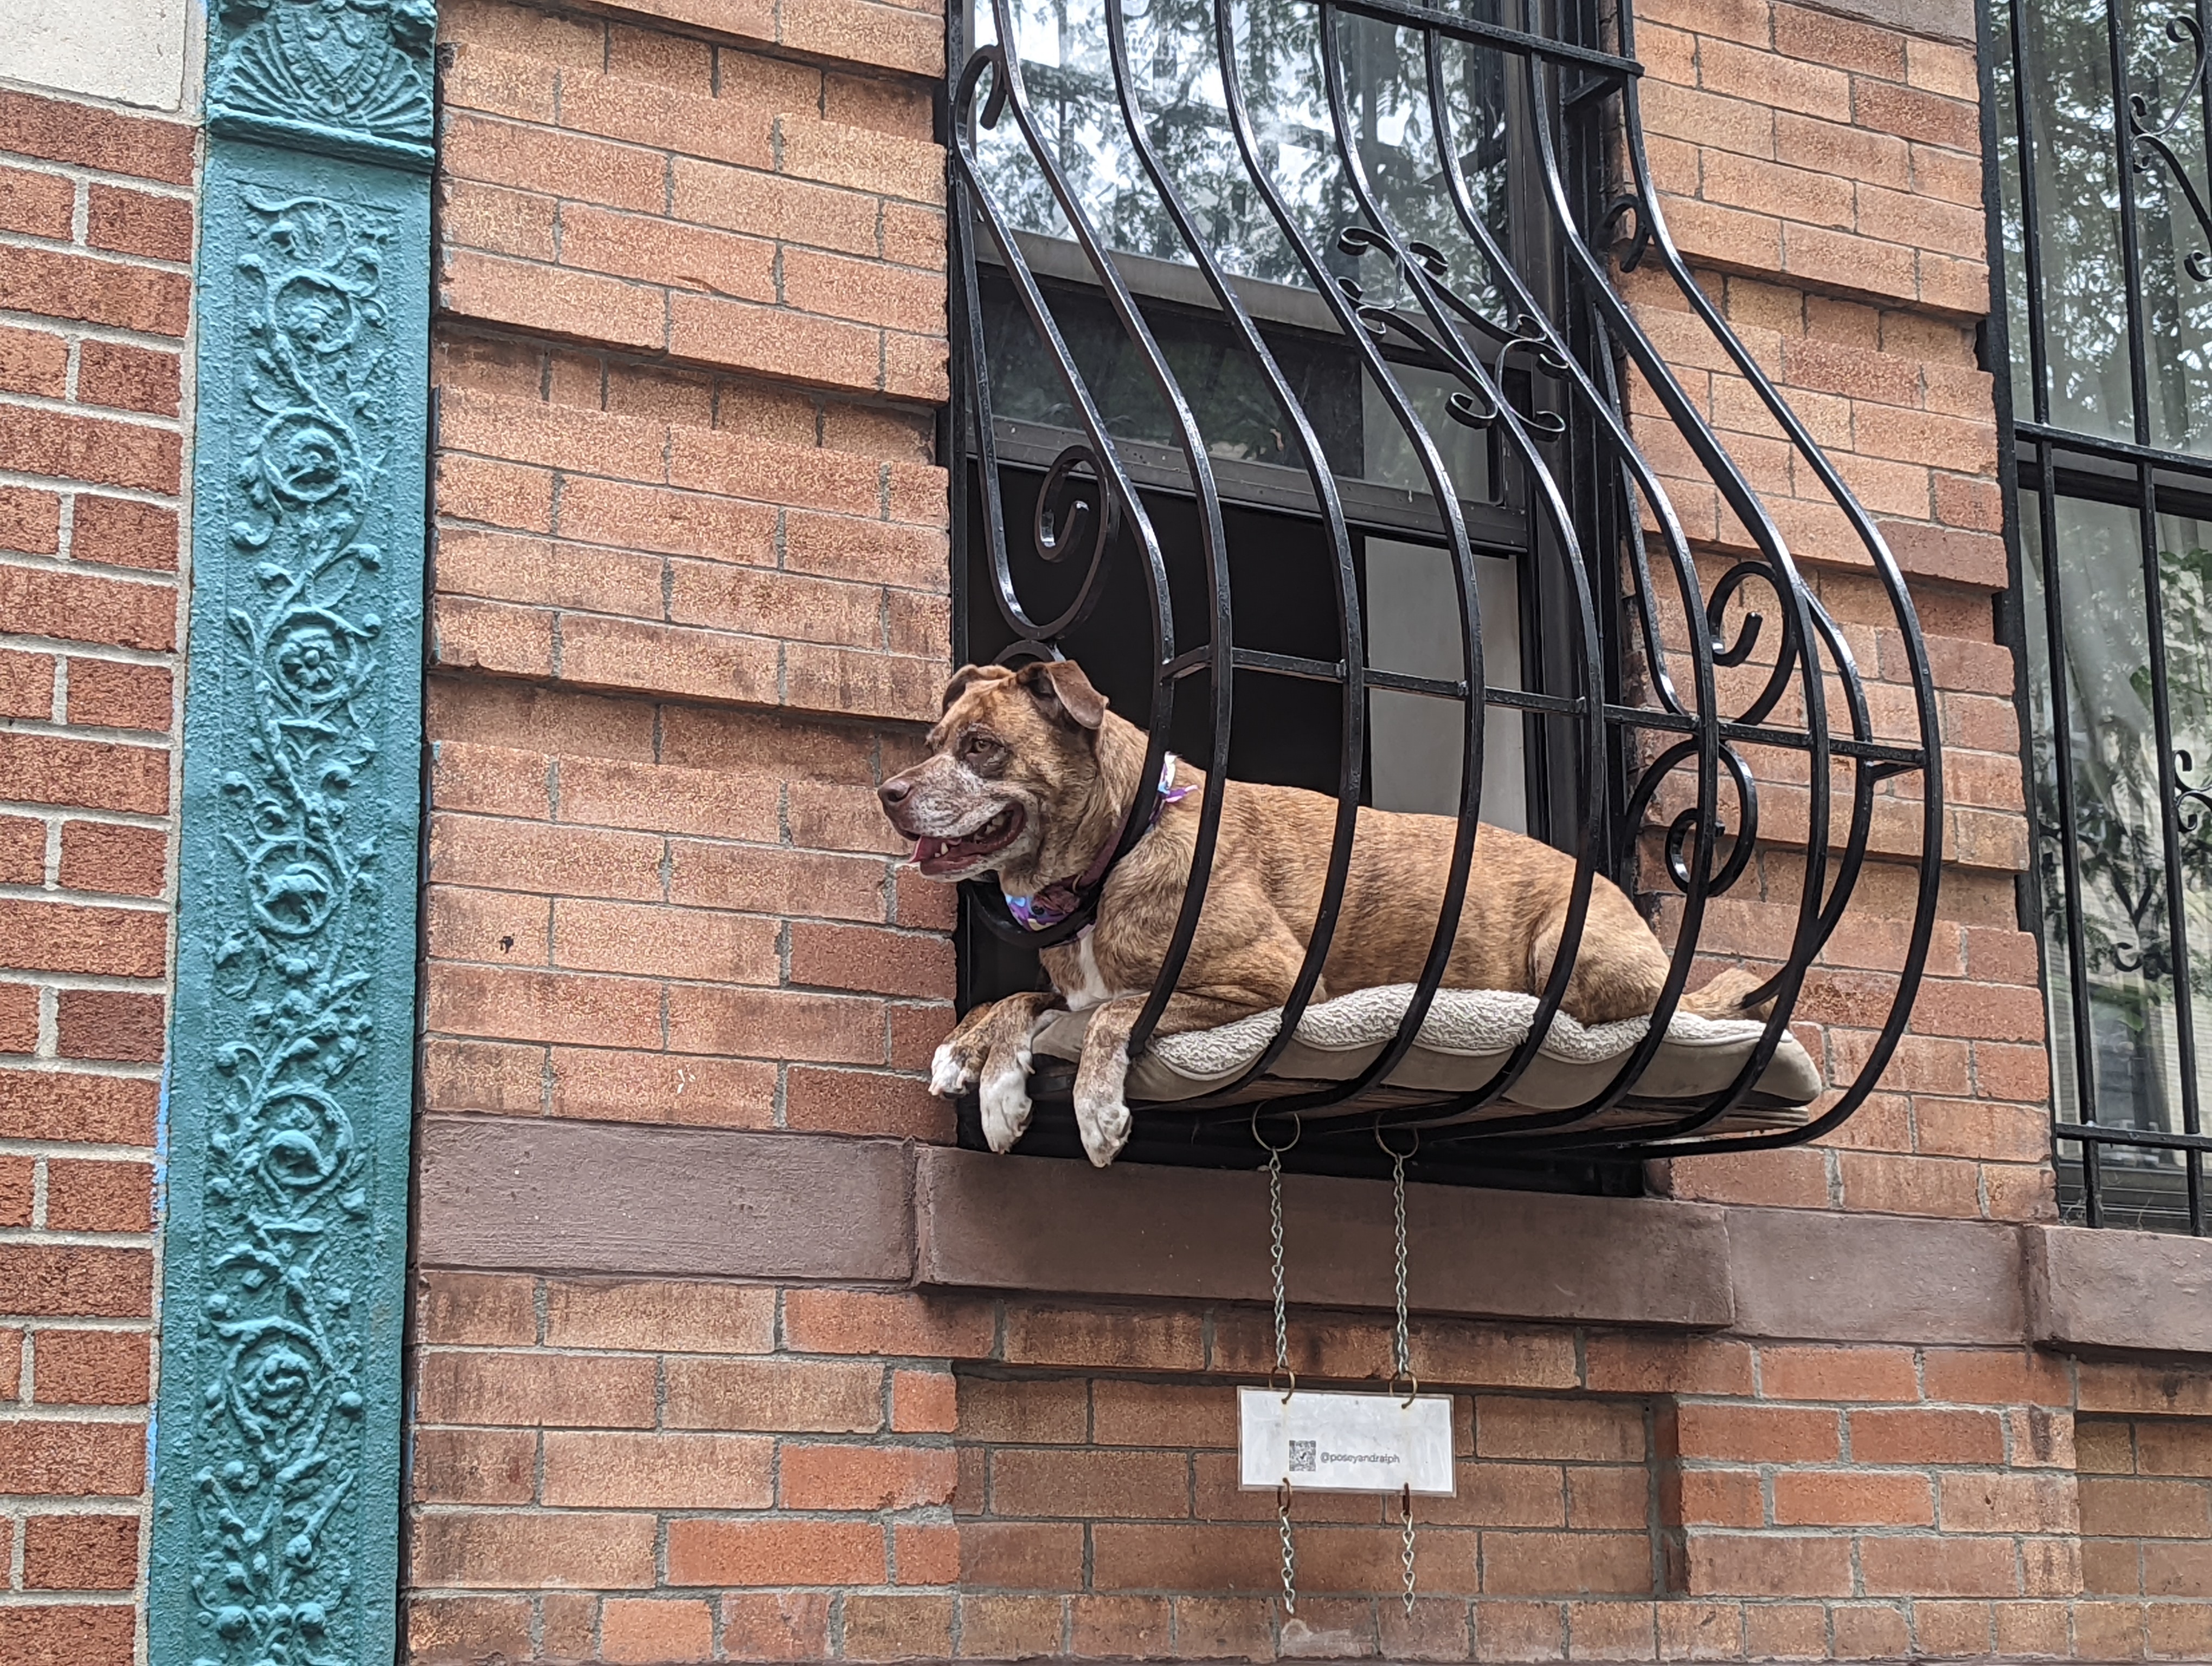 Photo of a dog sitting in a window grating.